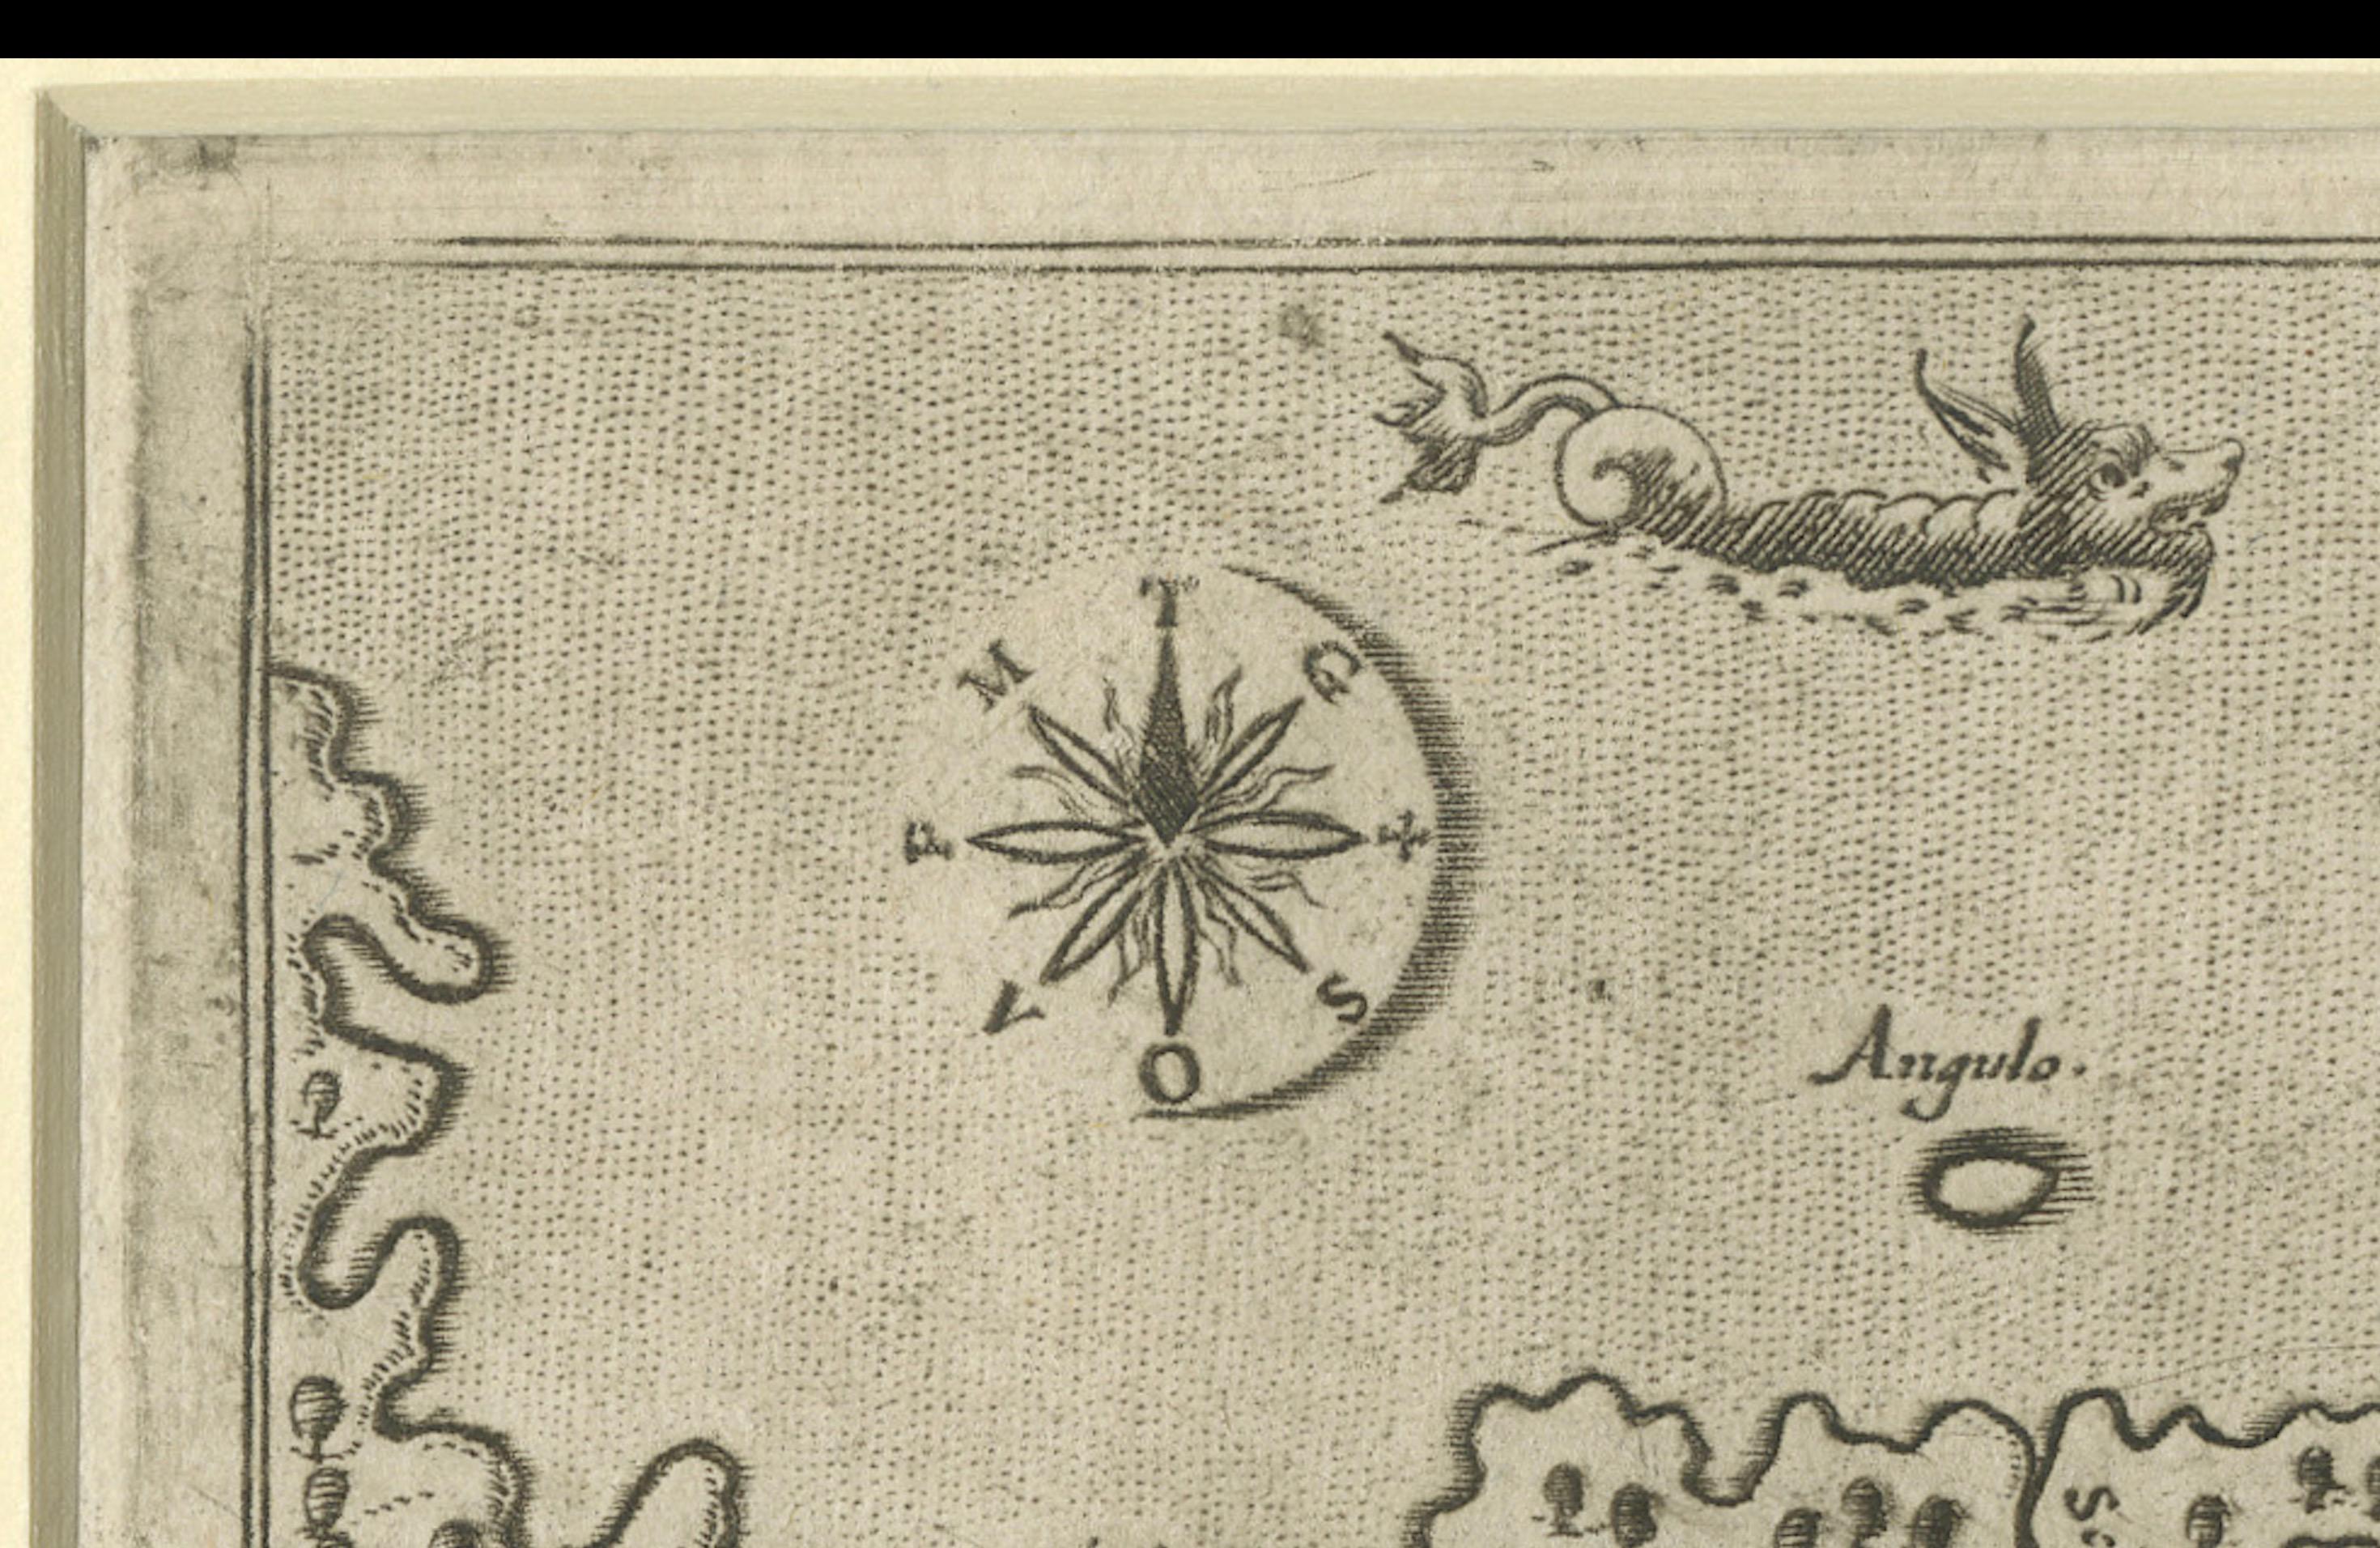 Paper Early Map of Puerto Rico Printed in Venice by G. F. Camocio in 1571